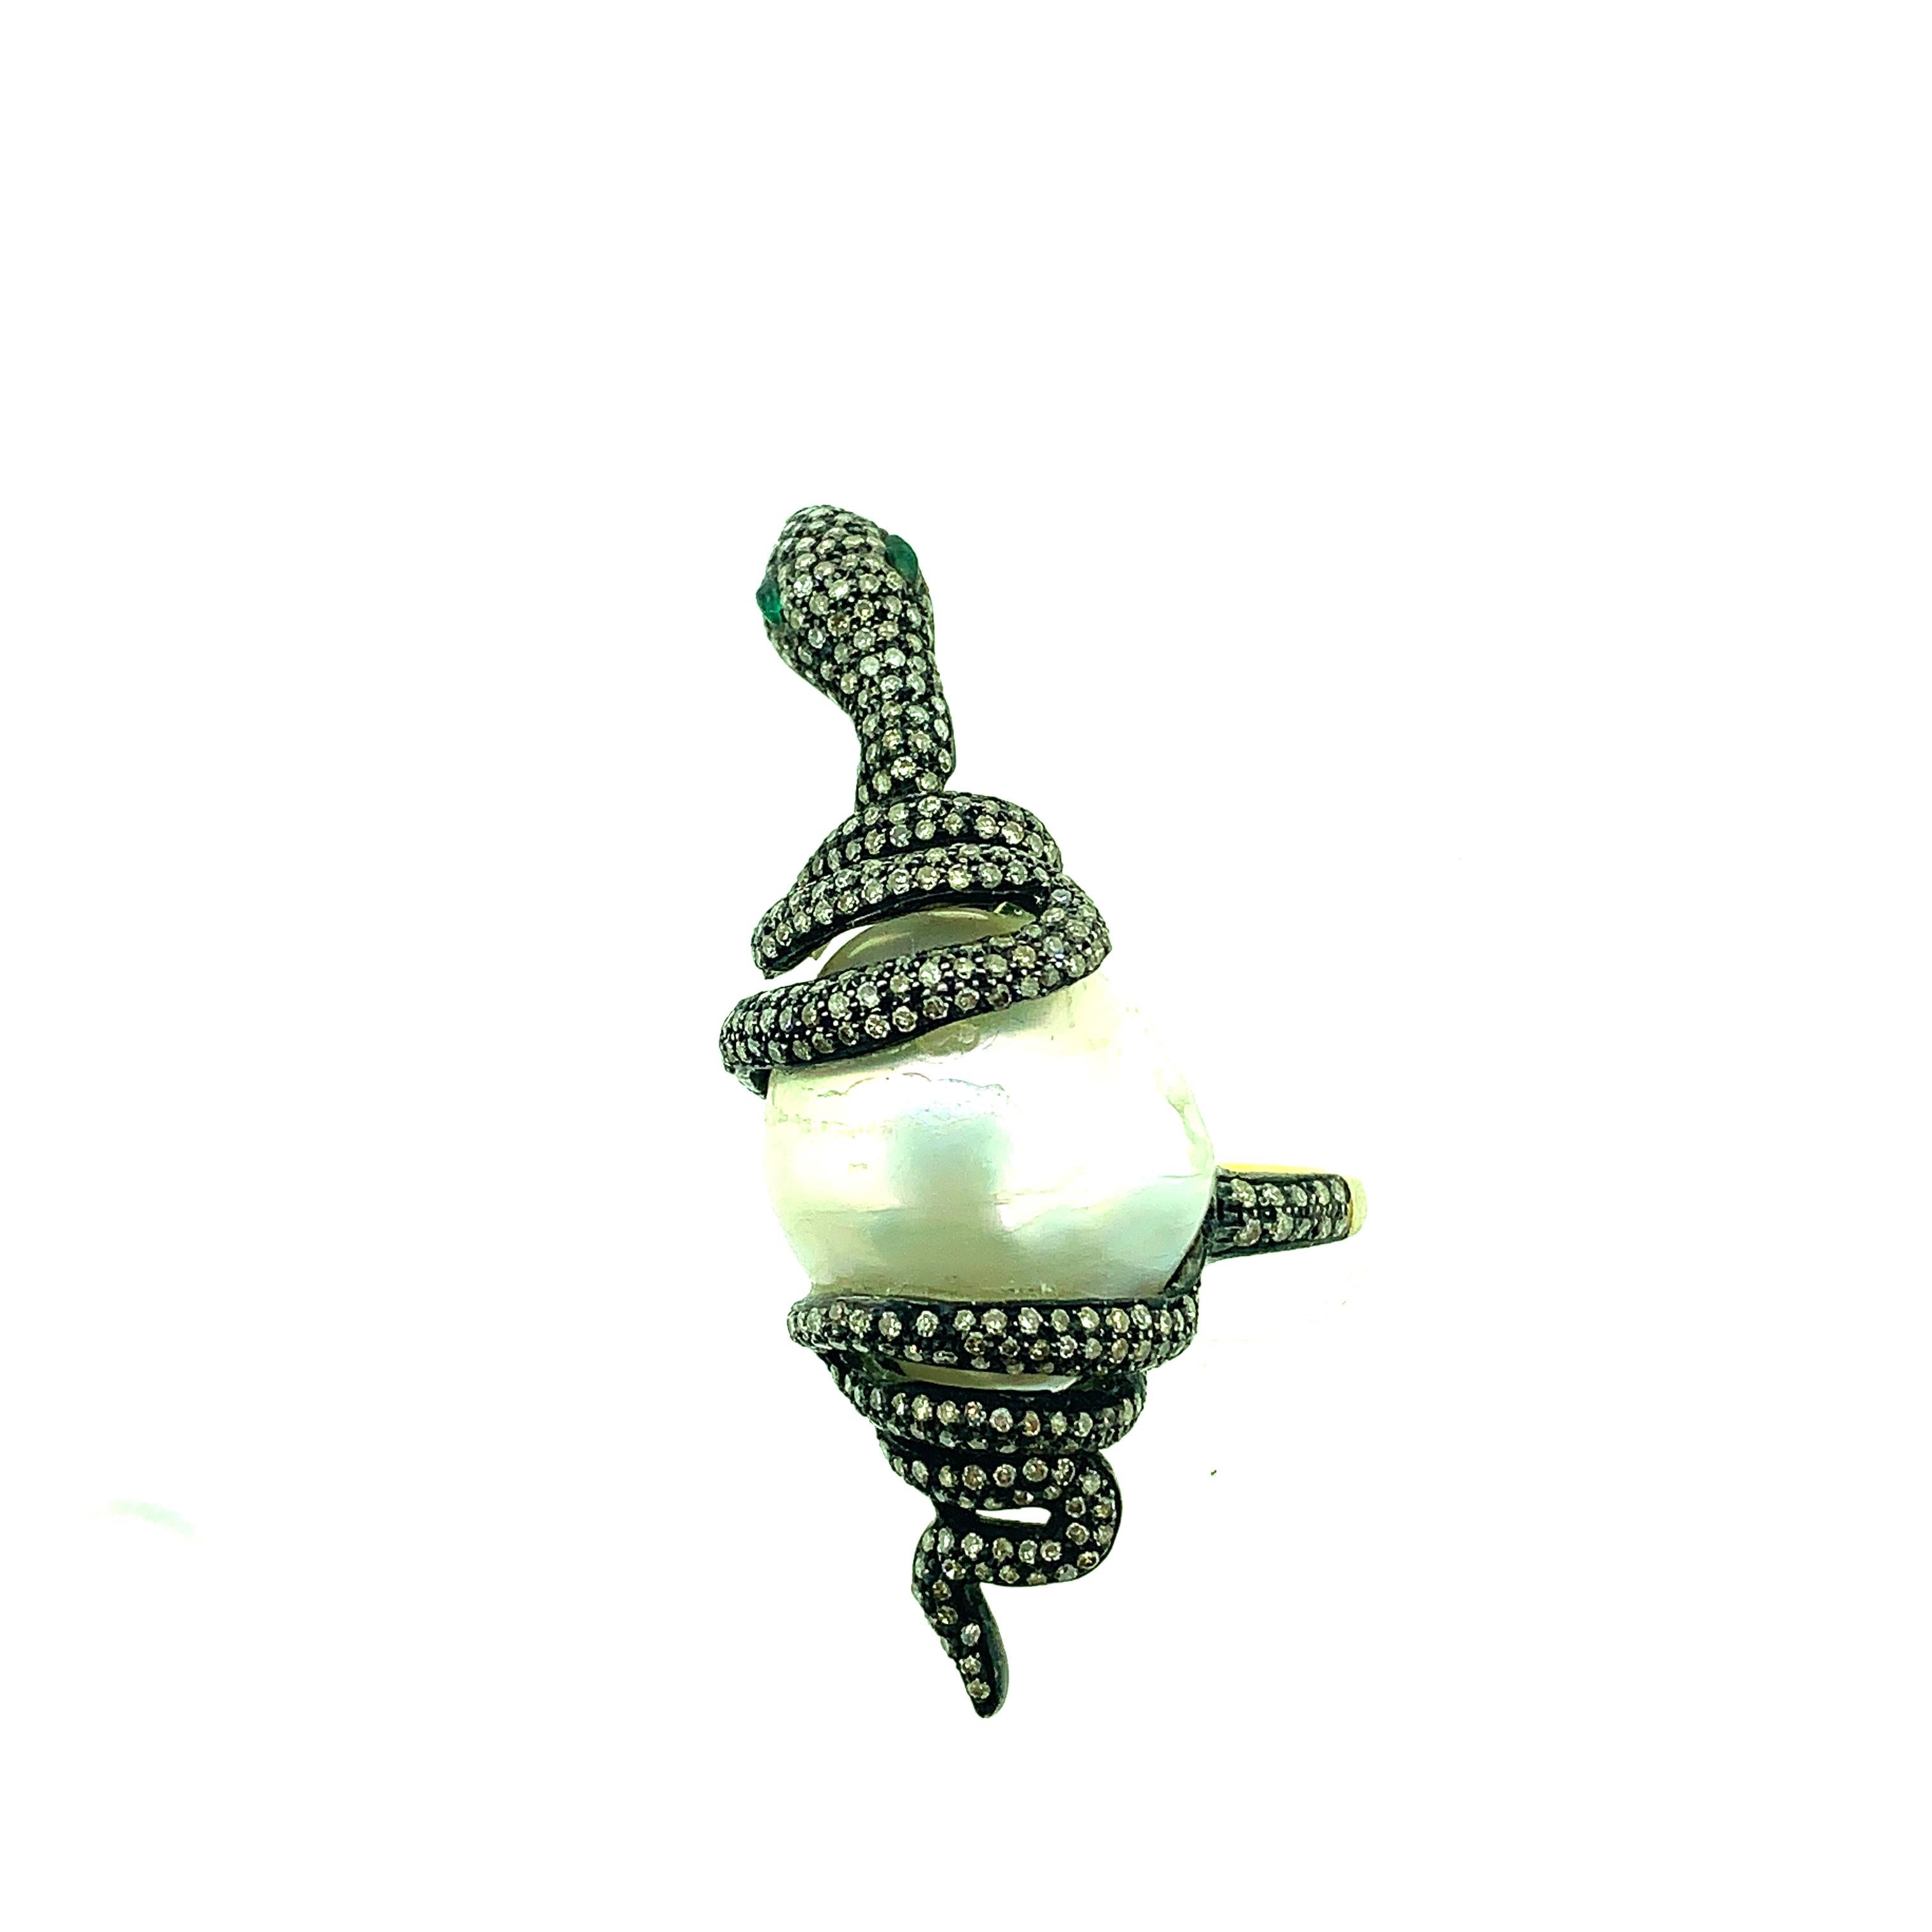 31.37 ct Pearl, 0.17ct Emerald Eyes ,and 1.95 ct Champagne Diamonds Snake Ring set in Oxidized Sterling Silver with 14K Gold Shank. One of a kind snake ring made with pure love for snakes . The color combination of pearls works wonders with emerald